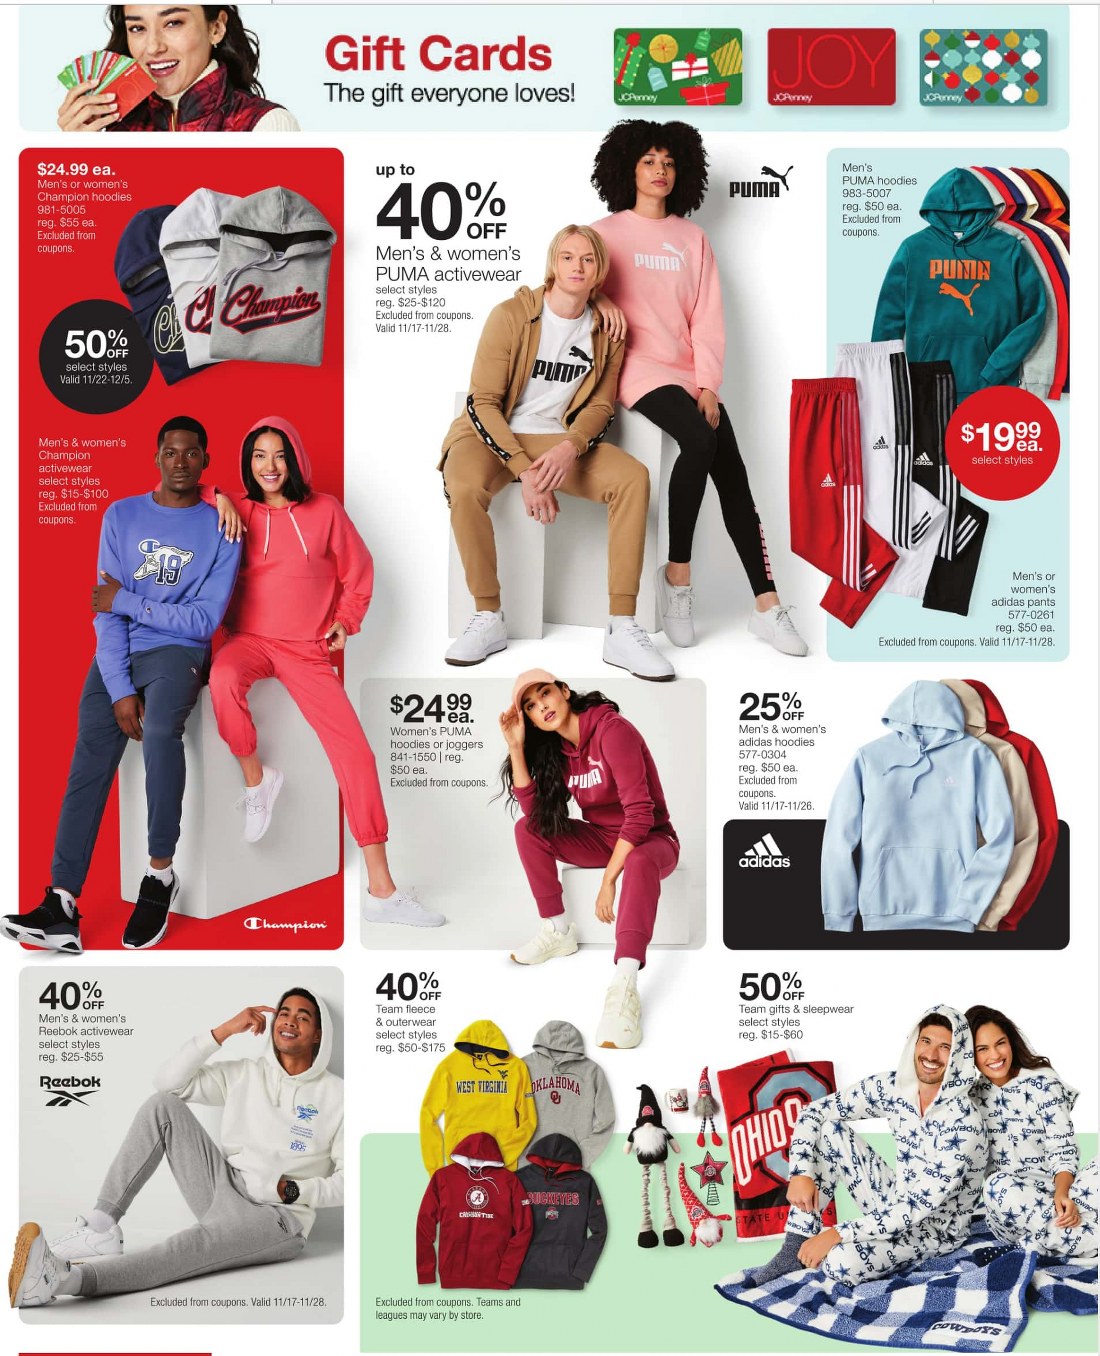 JCPenney Black Friday July 2024 Weekly Sales, Deals, Discounts and Digital Coupons.